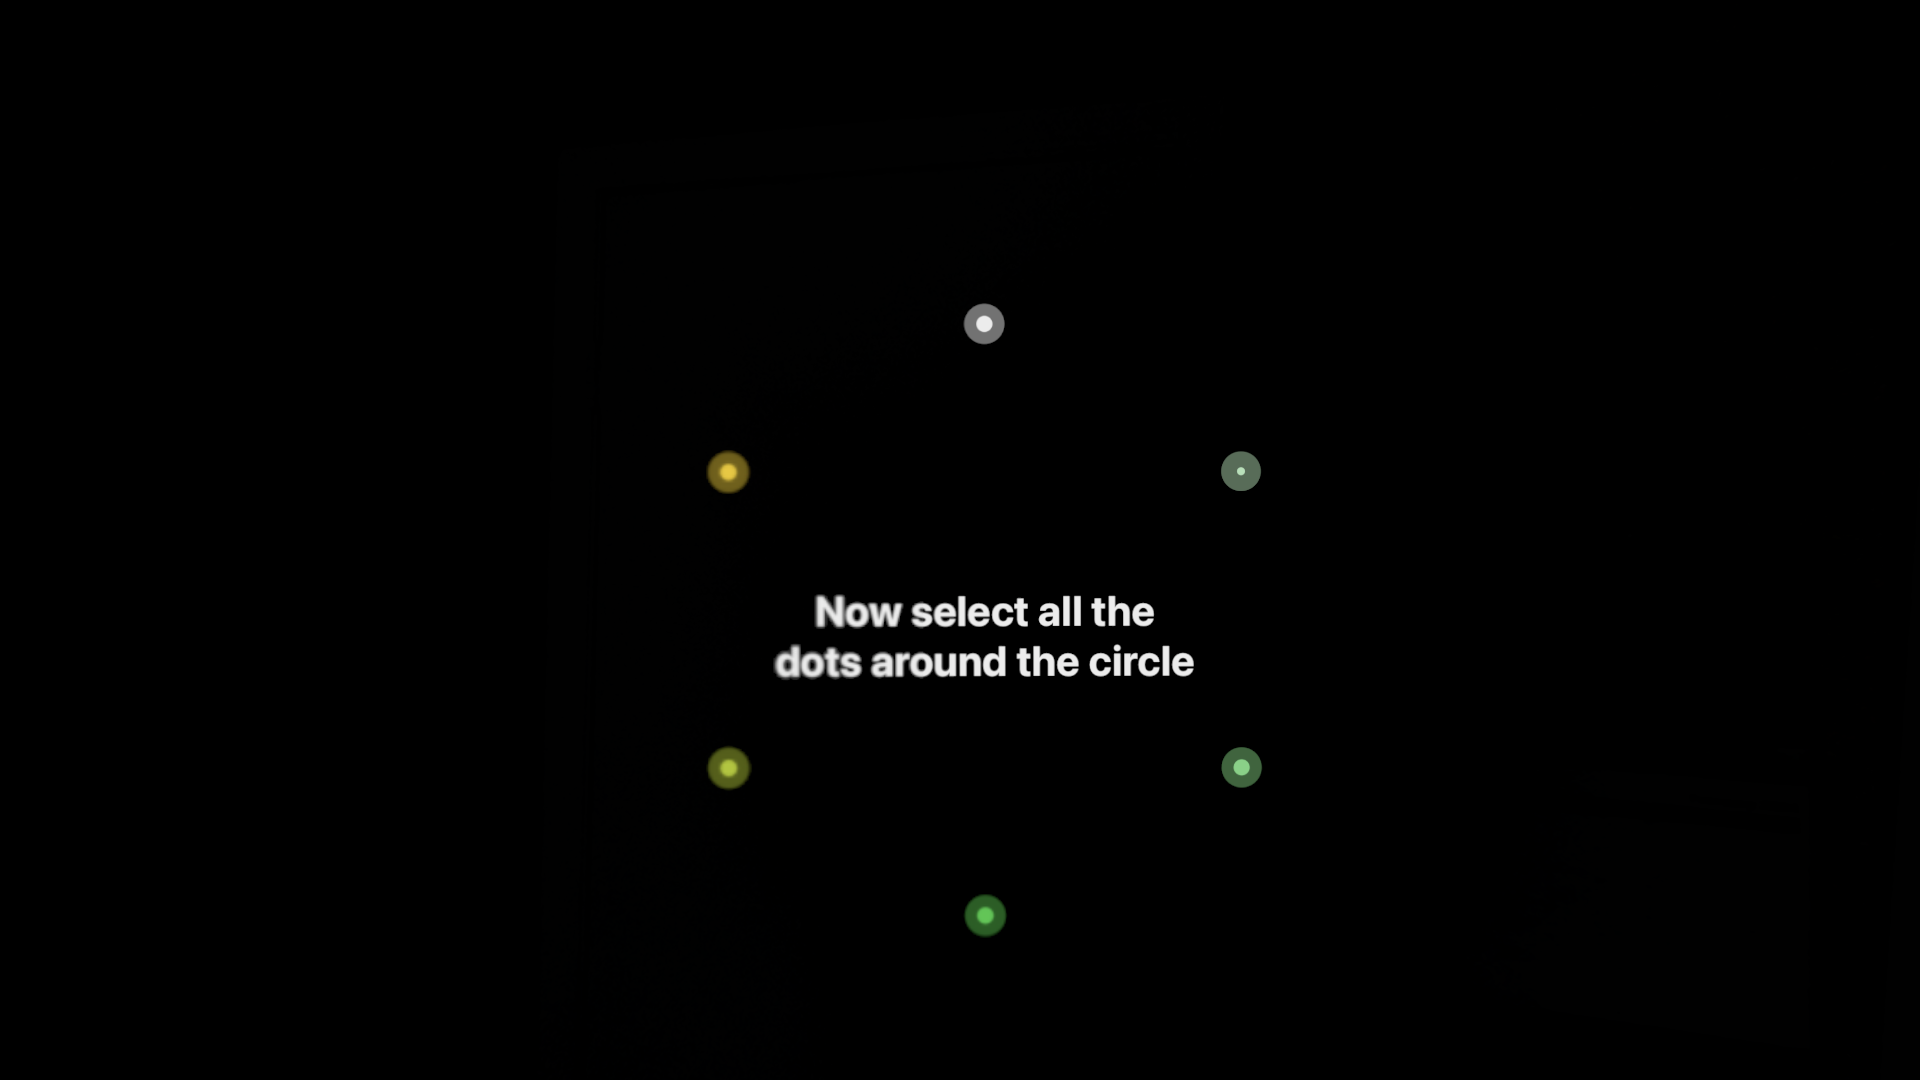 A screenshot of eye setup on visionOS. Six dots are arranged in a hexagon pattern around text reading "Now select all the dots around the circle". The background is a very dimmed view of passthrough to the real world.